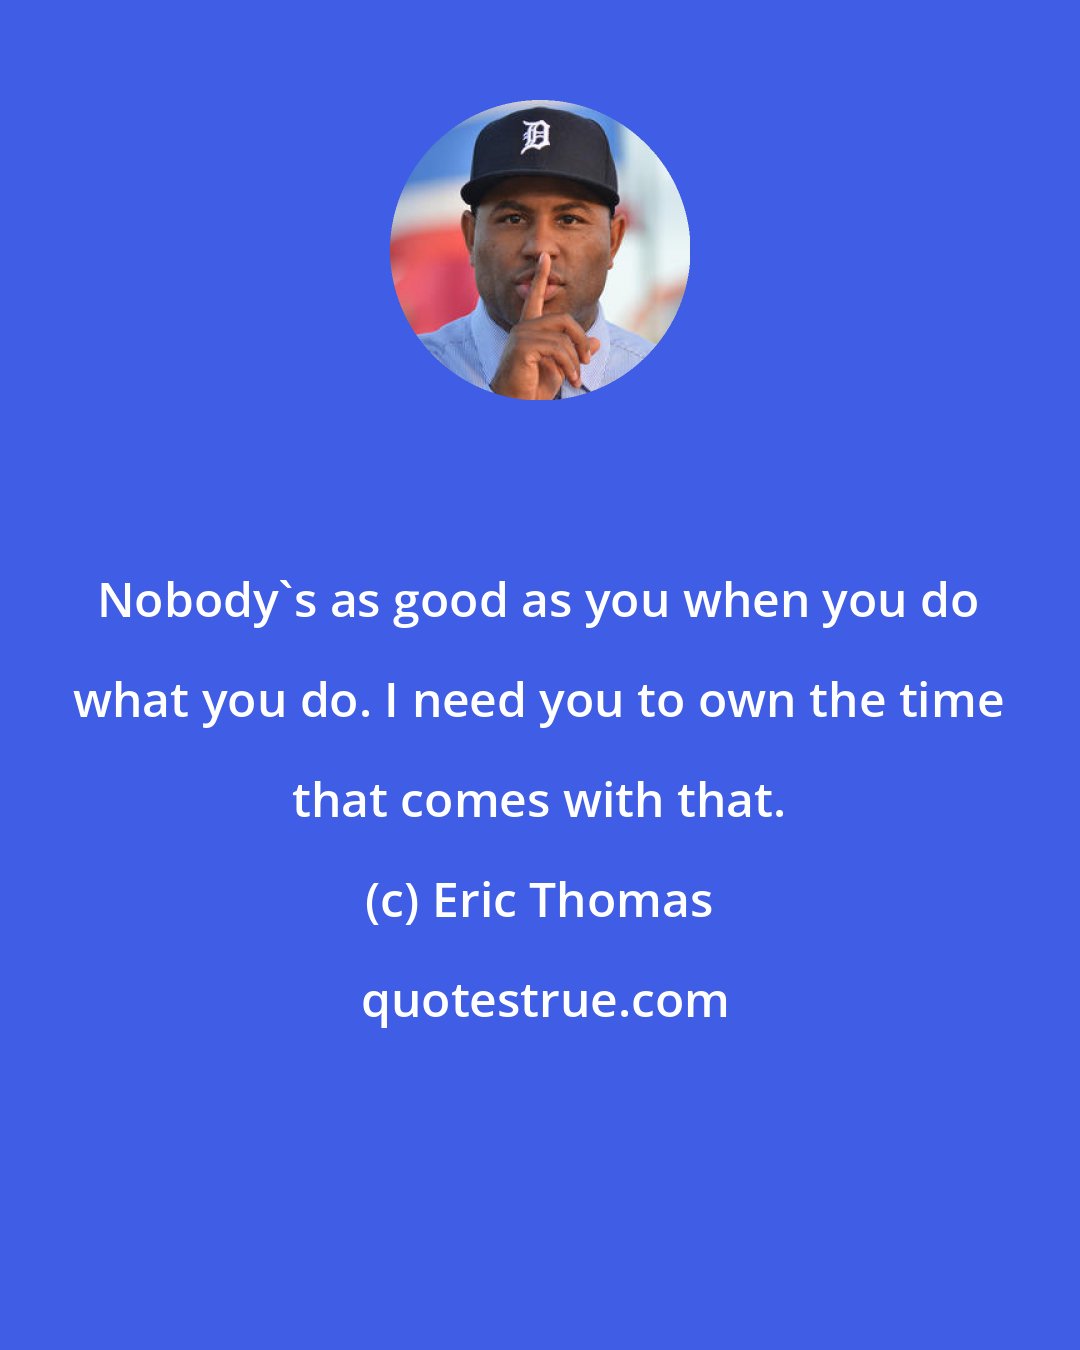 Eric Thomas: Nobody's as good as you when you do what you do. I need you to own the time that comes with that.